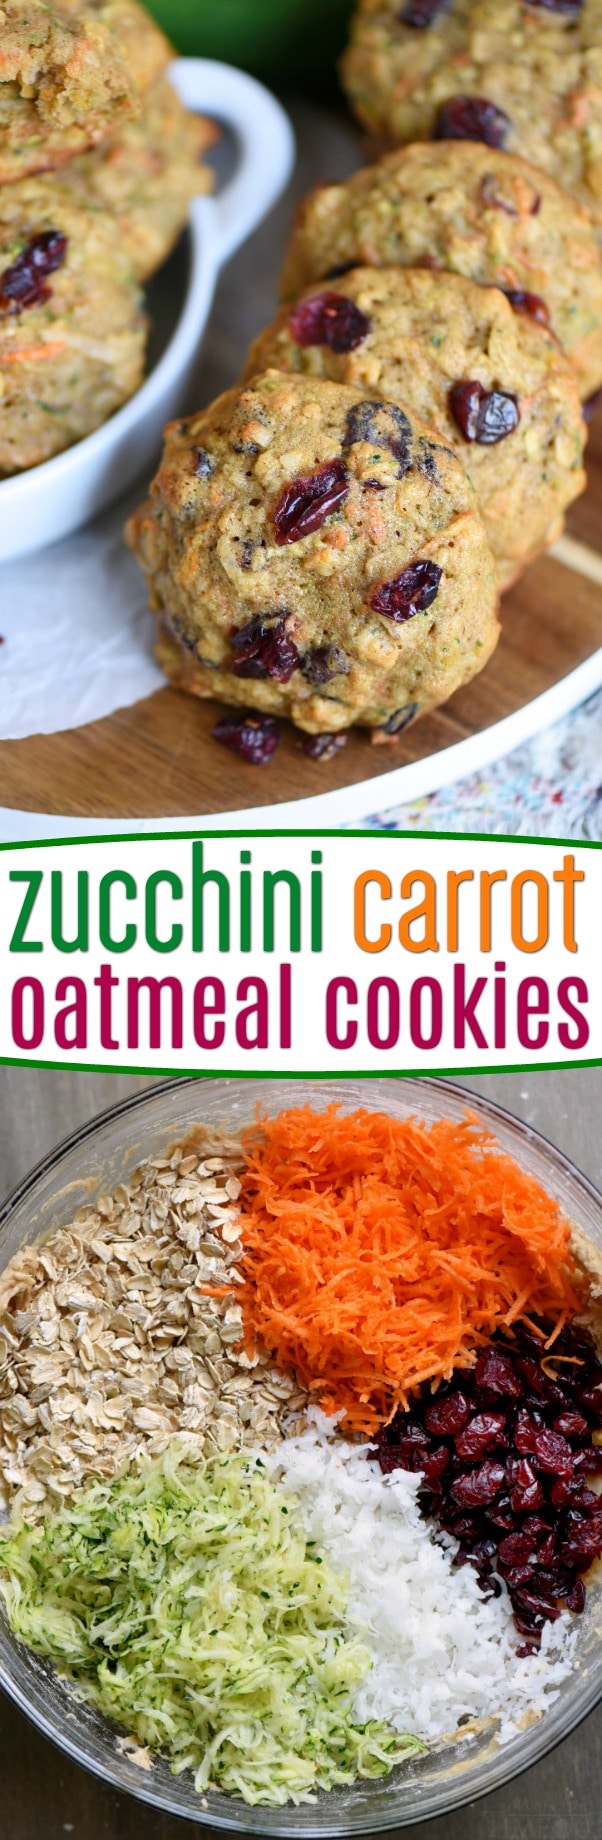 These amazing Zucchini Carrot Oatmeal Cookies are packed full of zucchini, carrots, oatmeal, dried cranberries, and coconut!  All the good stuff! The perfect after school snack! // Mom On Timeout